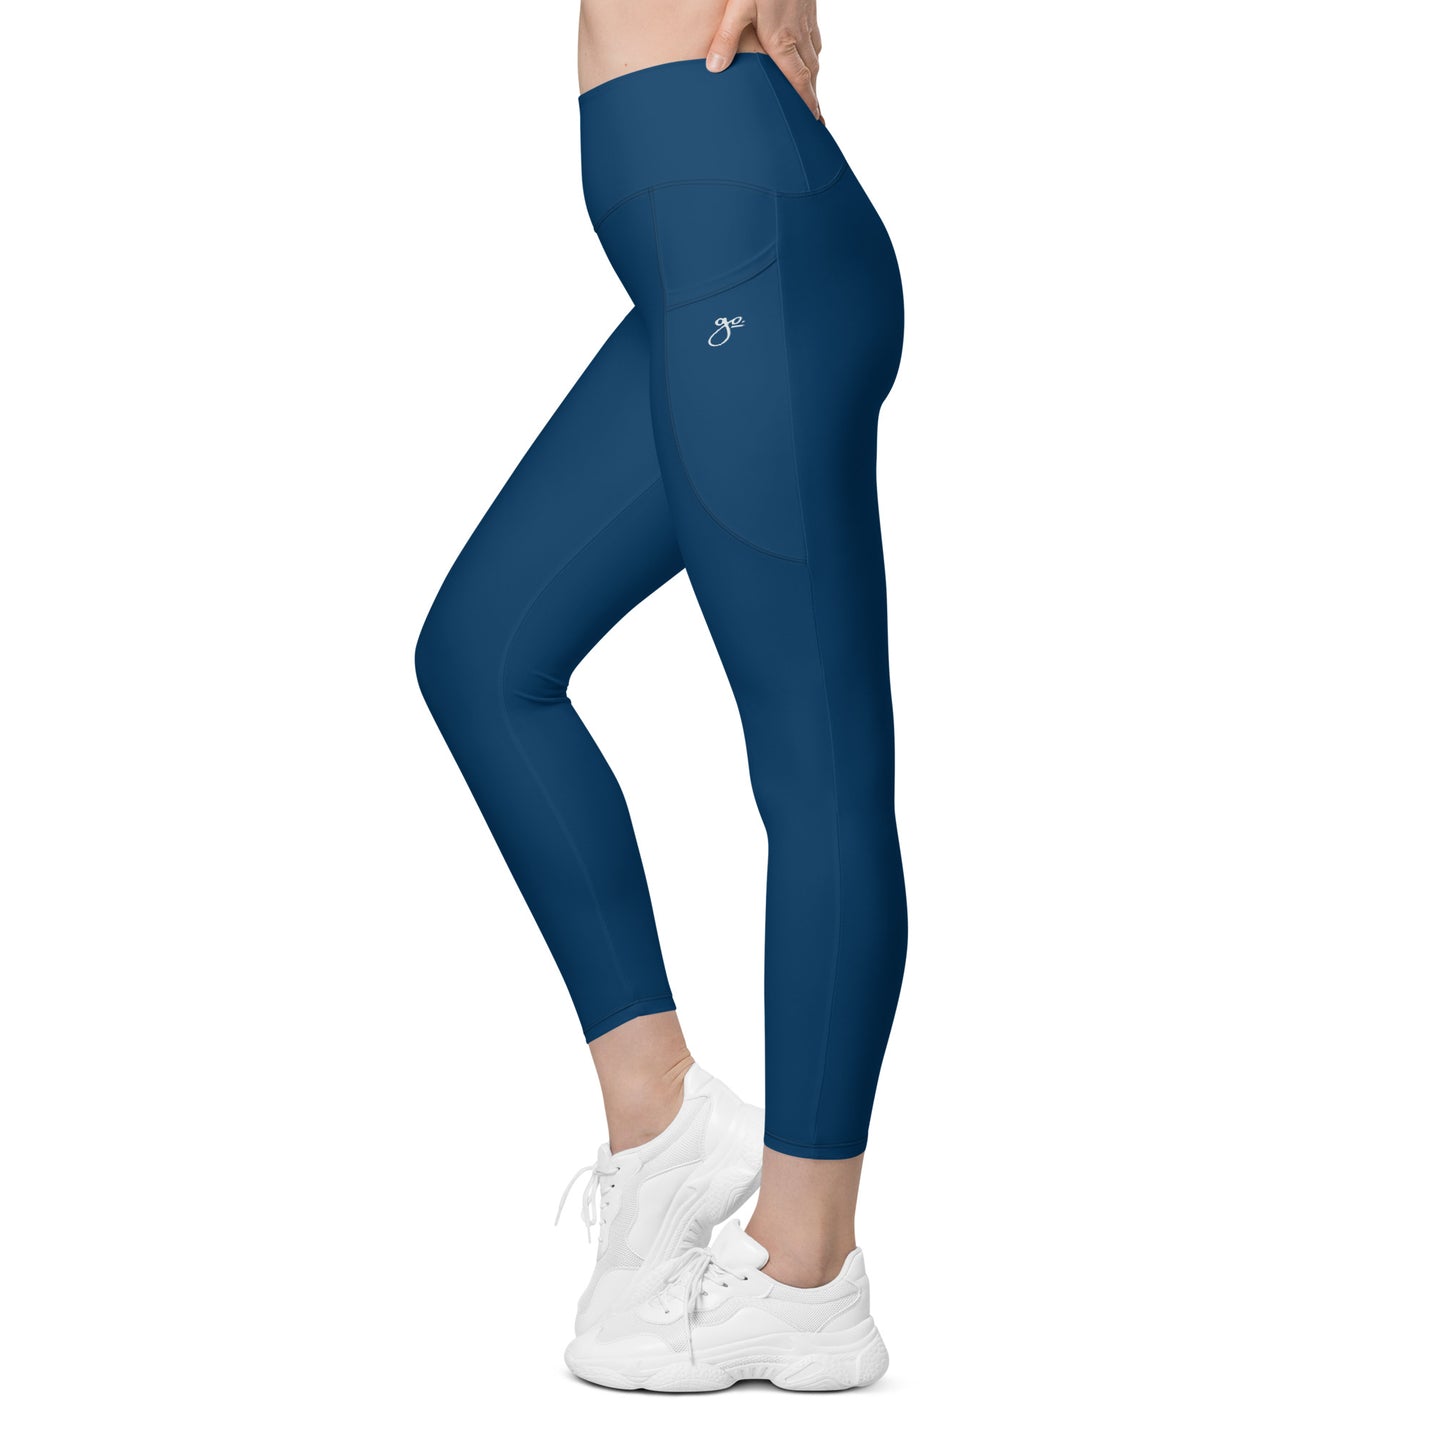 Go. Leggings With Pockets - Blue